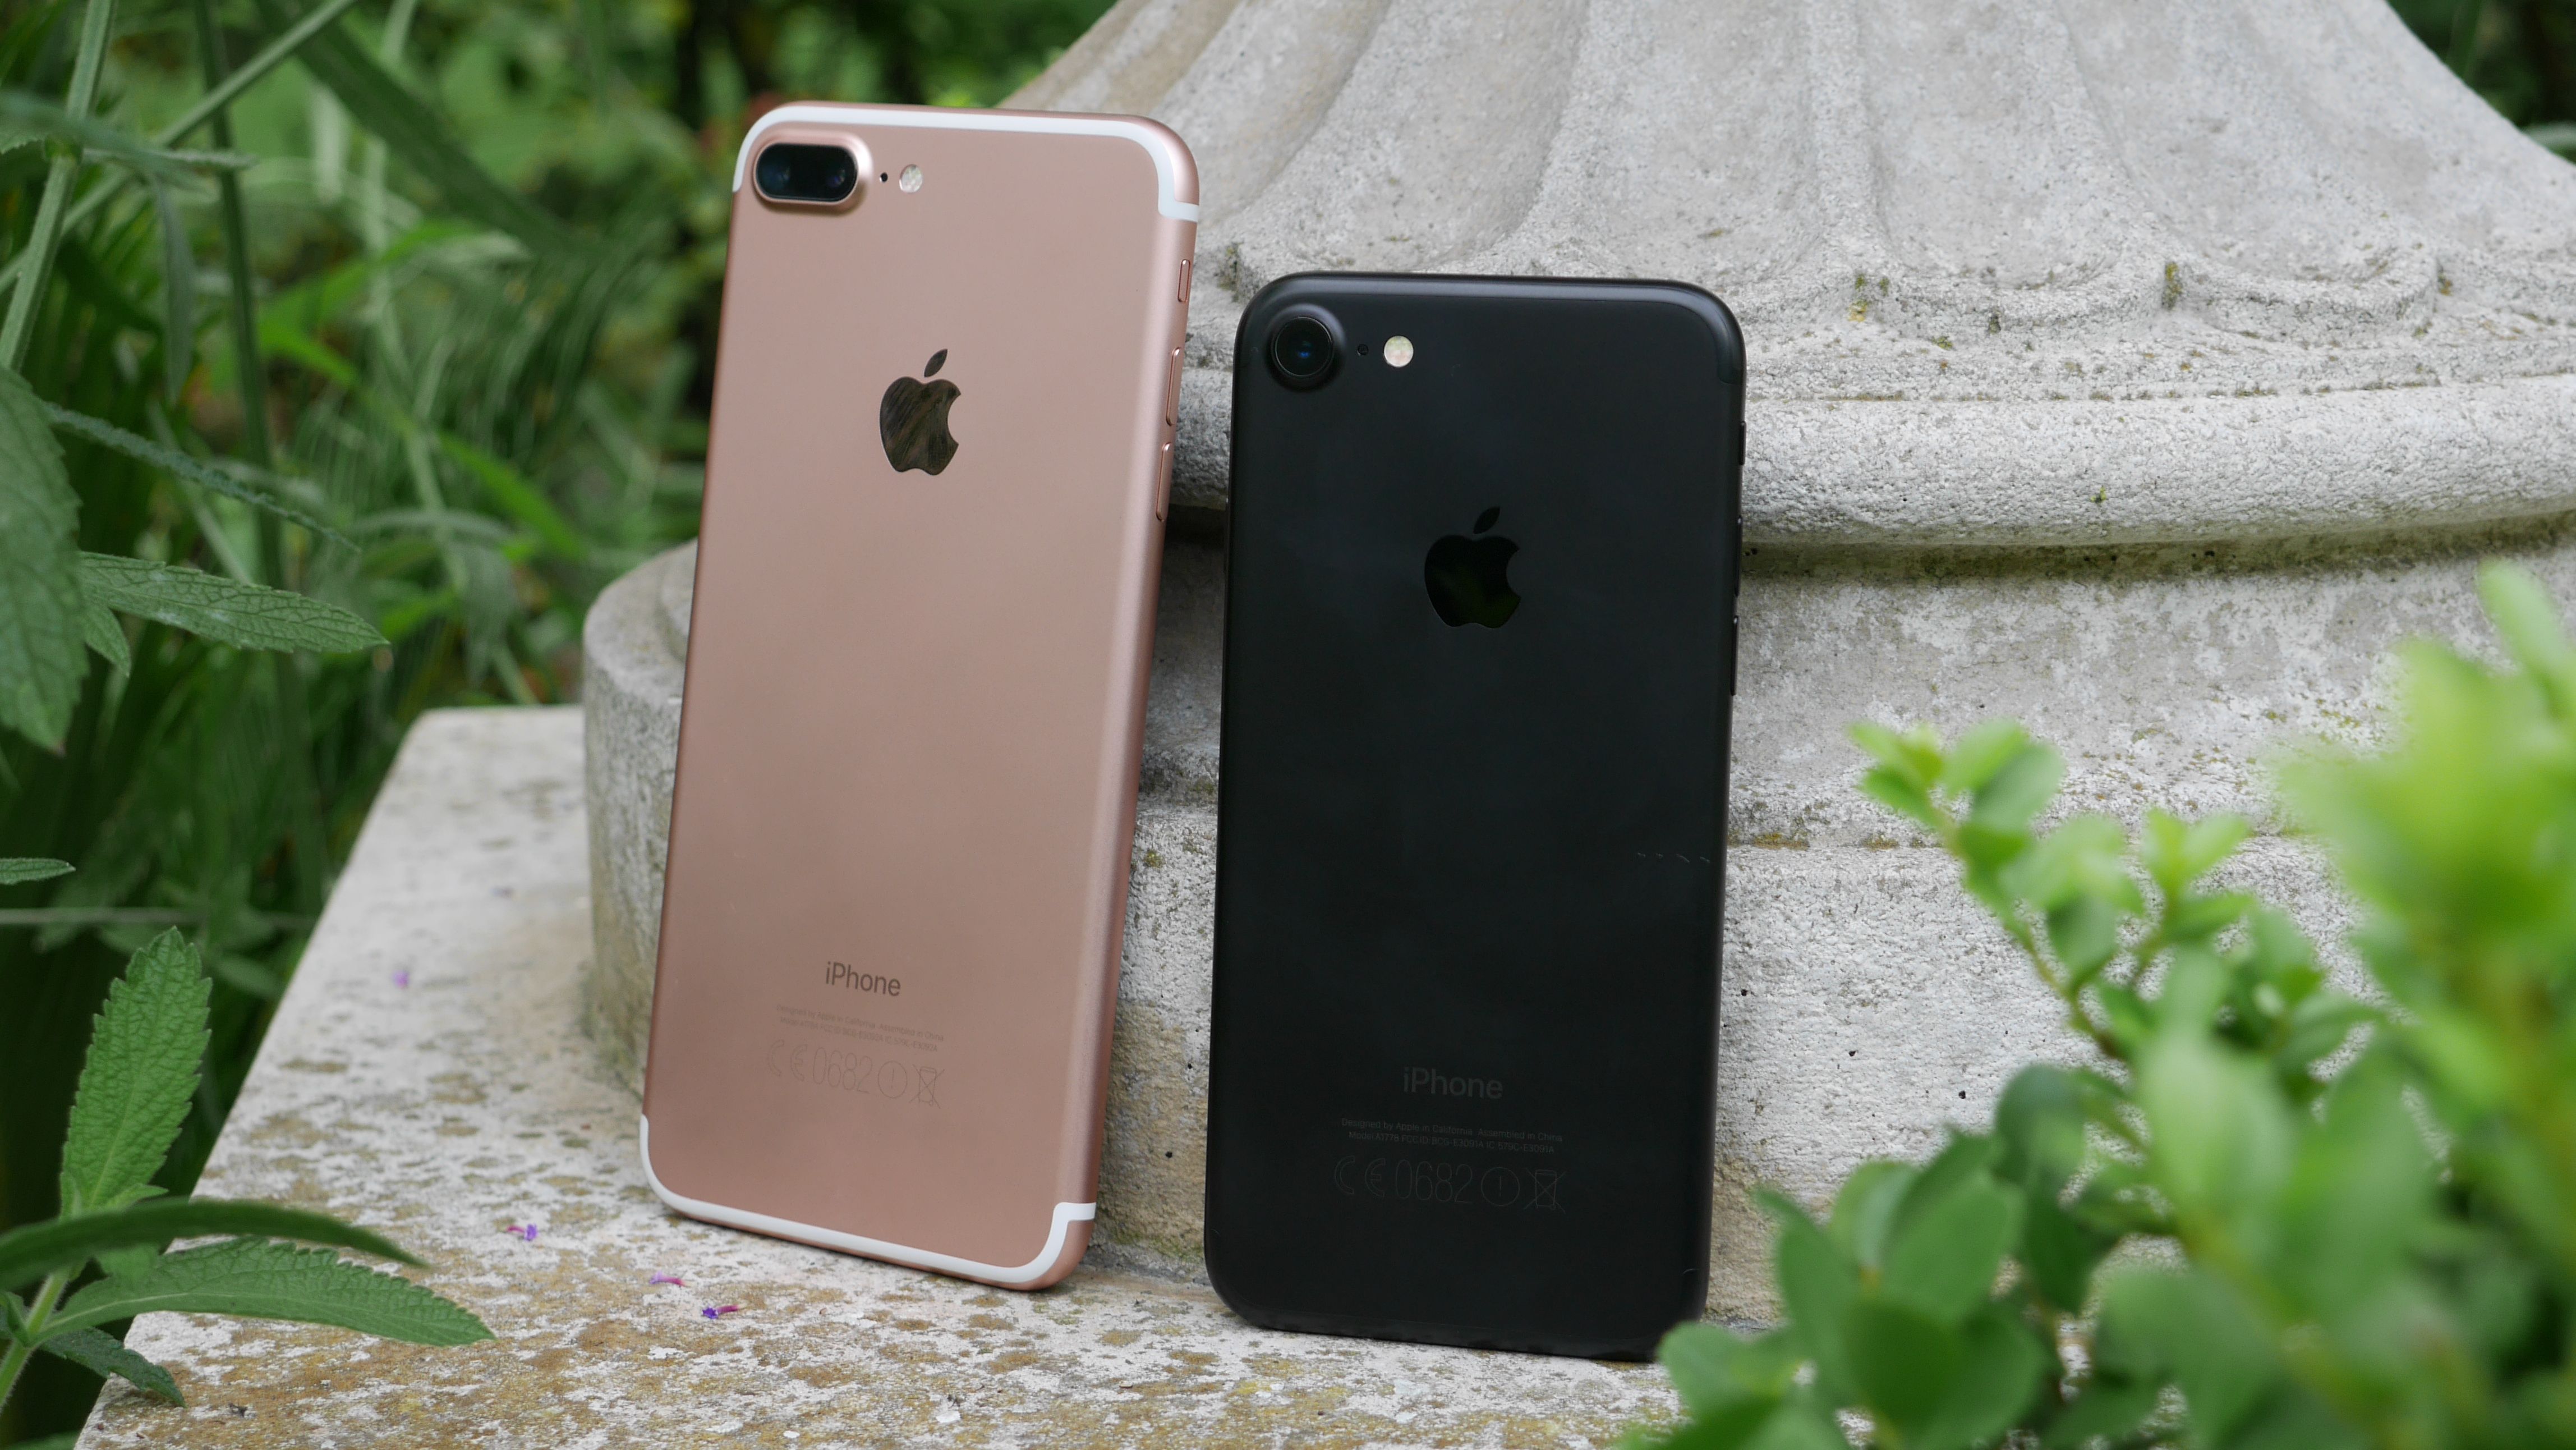 forvridning campingvogn Dræbte iPhone 7 vs iPhone 7 Plus: What's the difference and which is best for me?